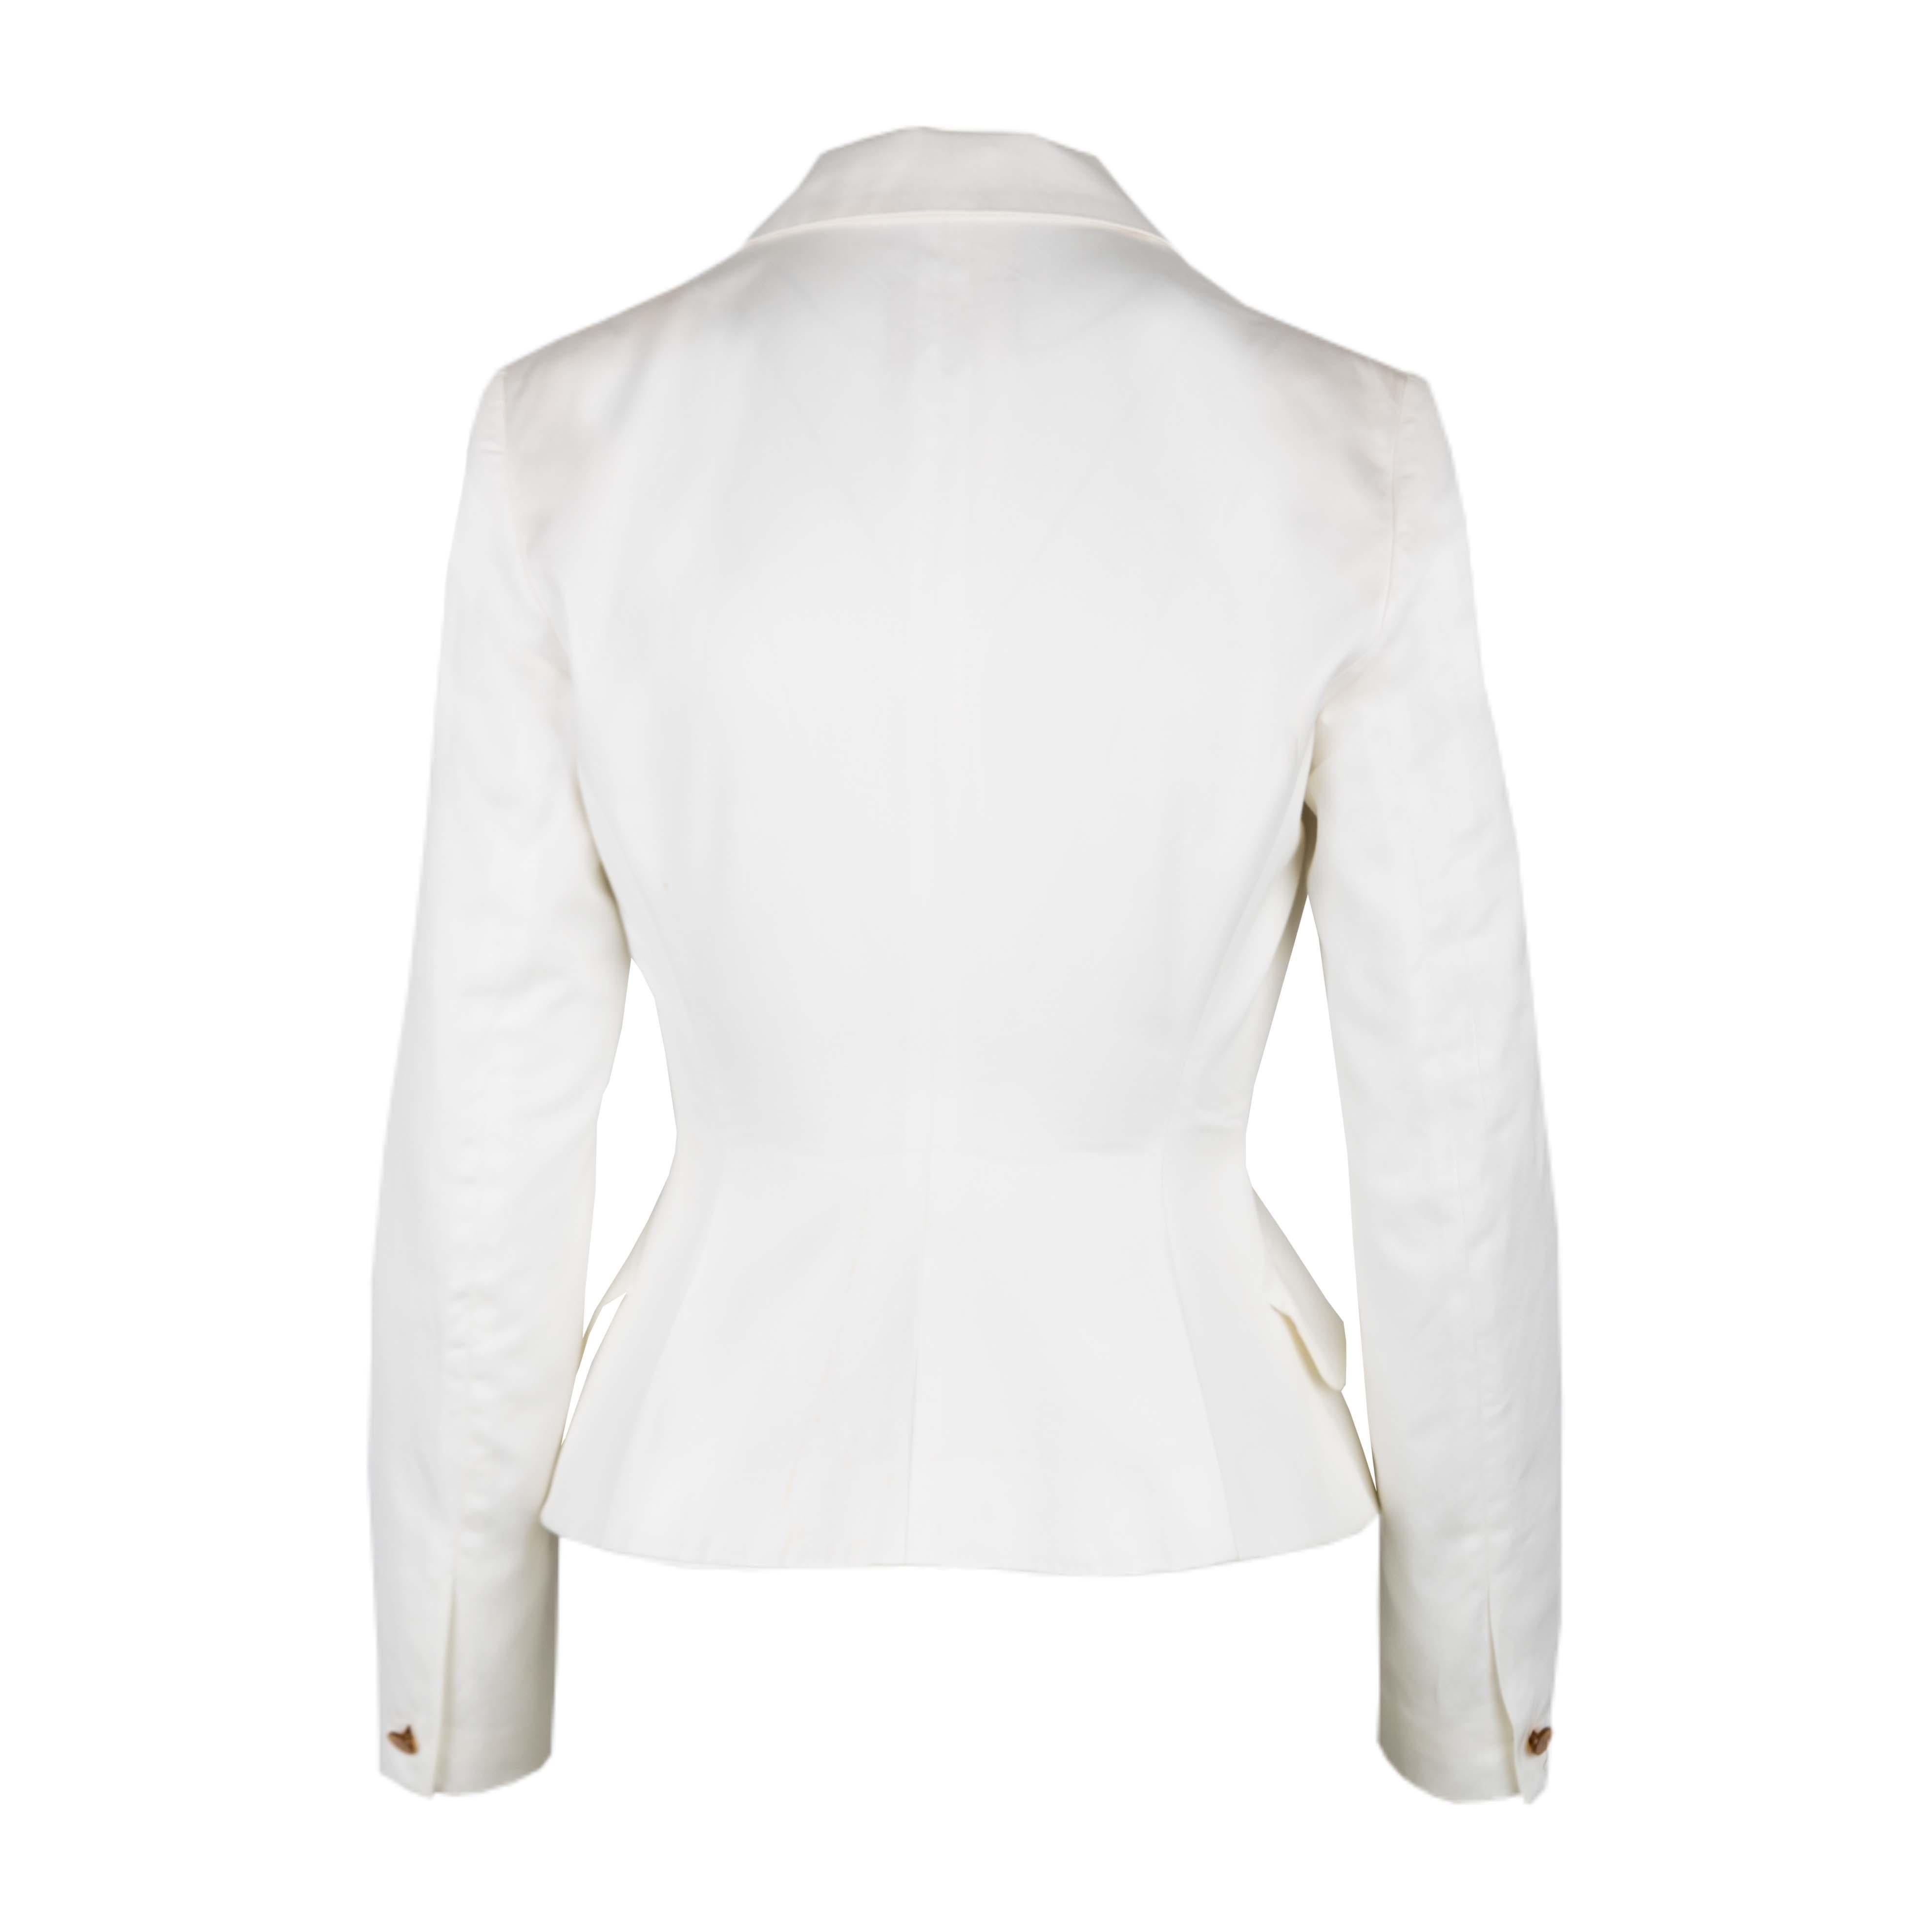 Vivienne Westwood White Cotton Skirt and Jacket Set - '10s 1